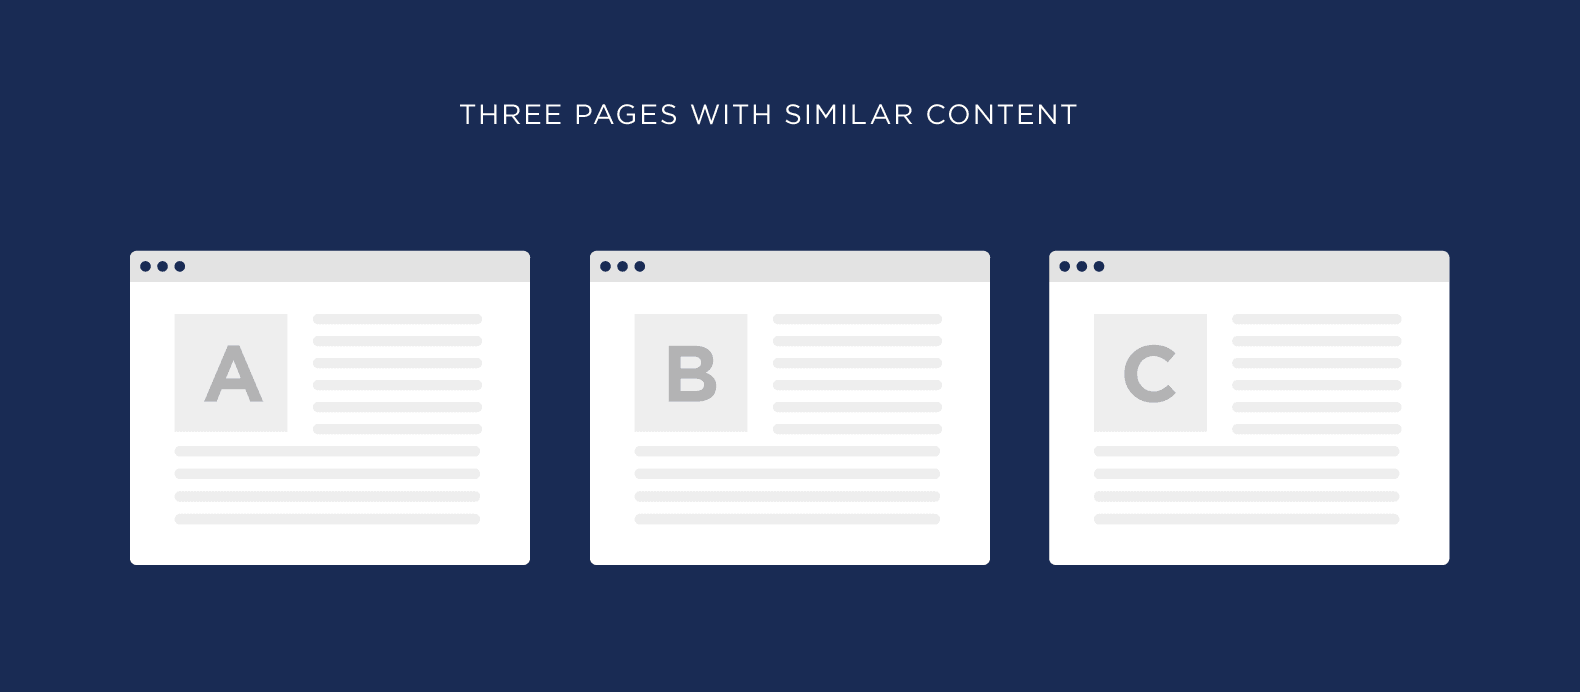 Finding Duplicate Content Pages